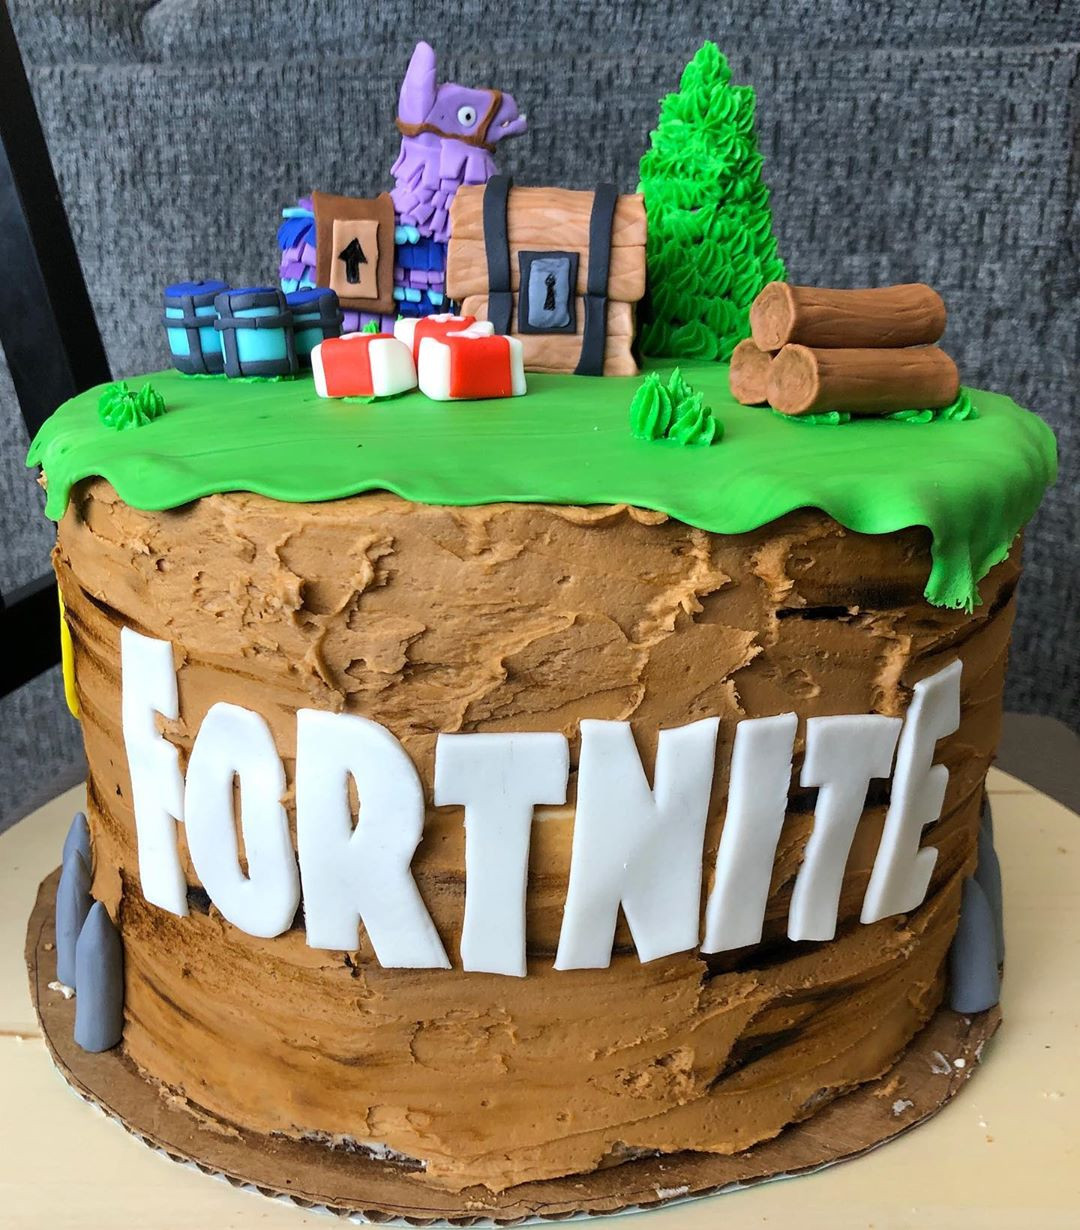 46 Amazing Fortnite Cakes and Cupcakes for an Epic Birthday Bash,fortnite cake ideas easy,easy fortnite cake,how to make a fortnite cake